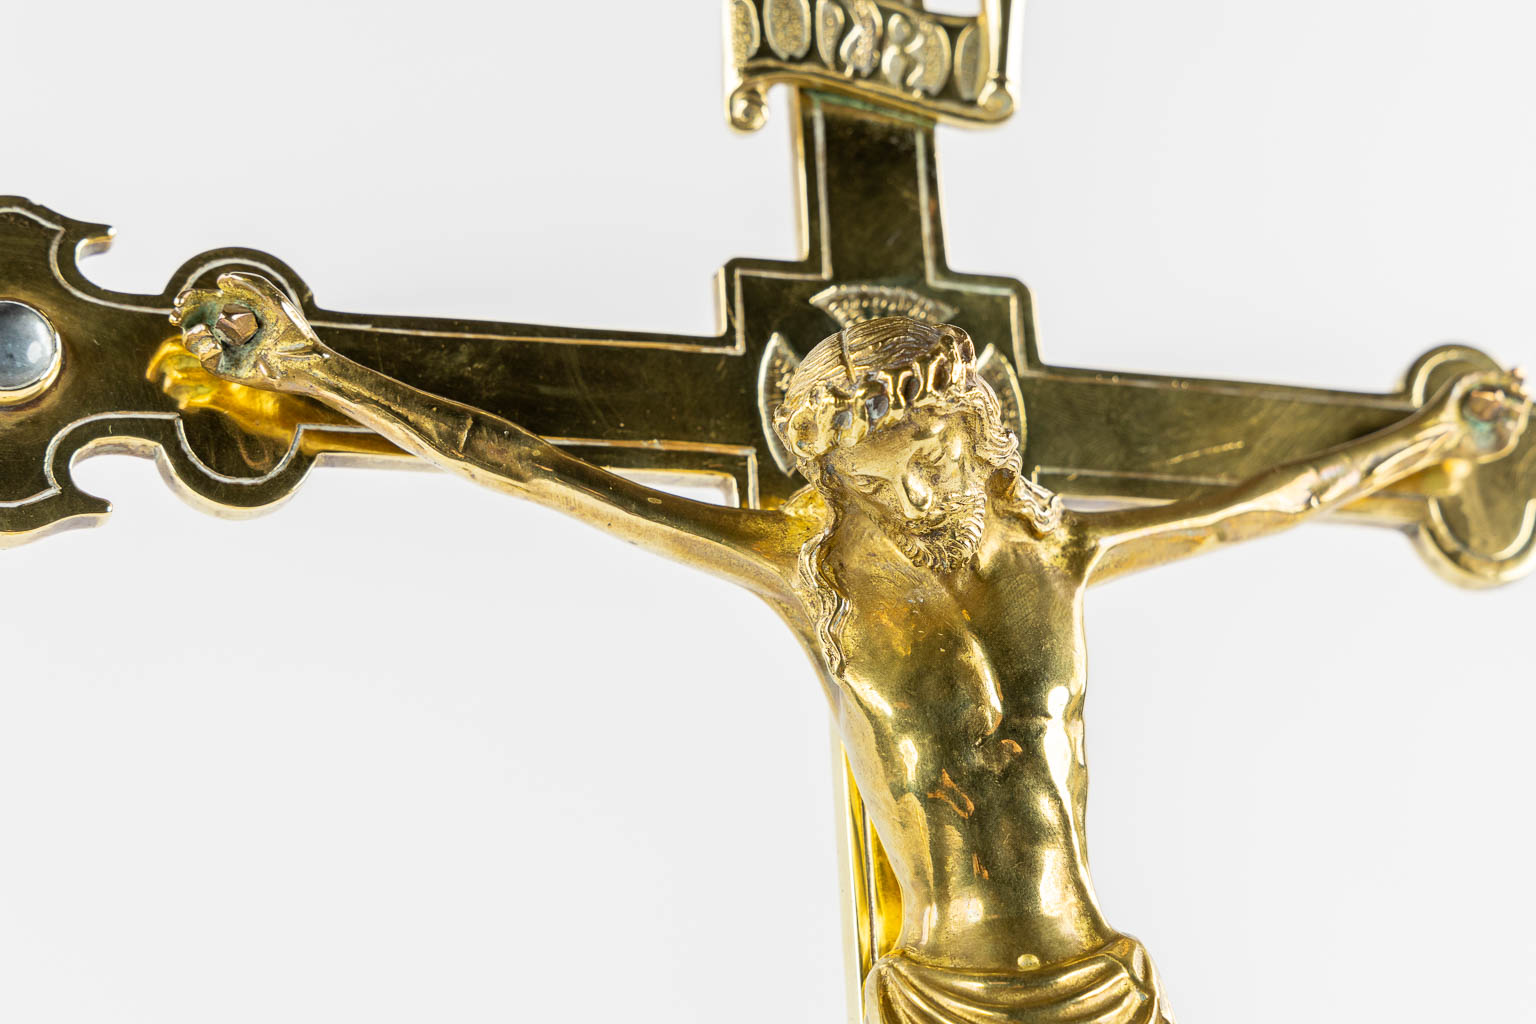 An altar crucifix and matching candelabra, Brass, Gothic revival, probably made by Bourdon, Ghent. (L:21 x W:27,5 x H:57,5 cm)